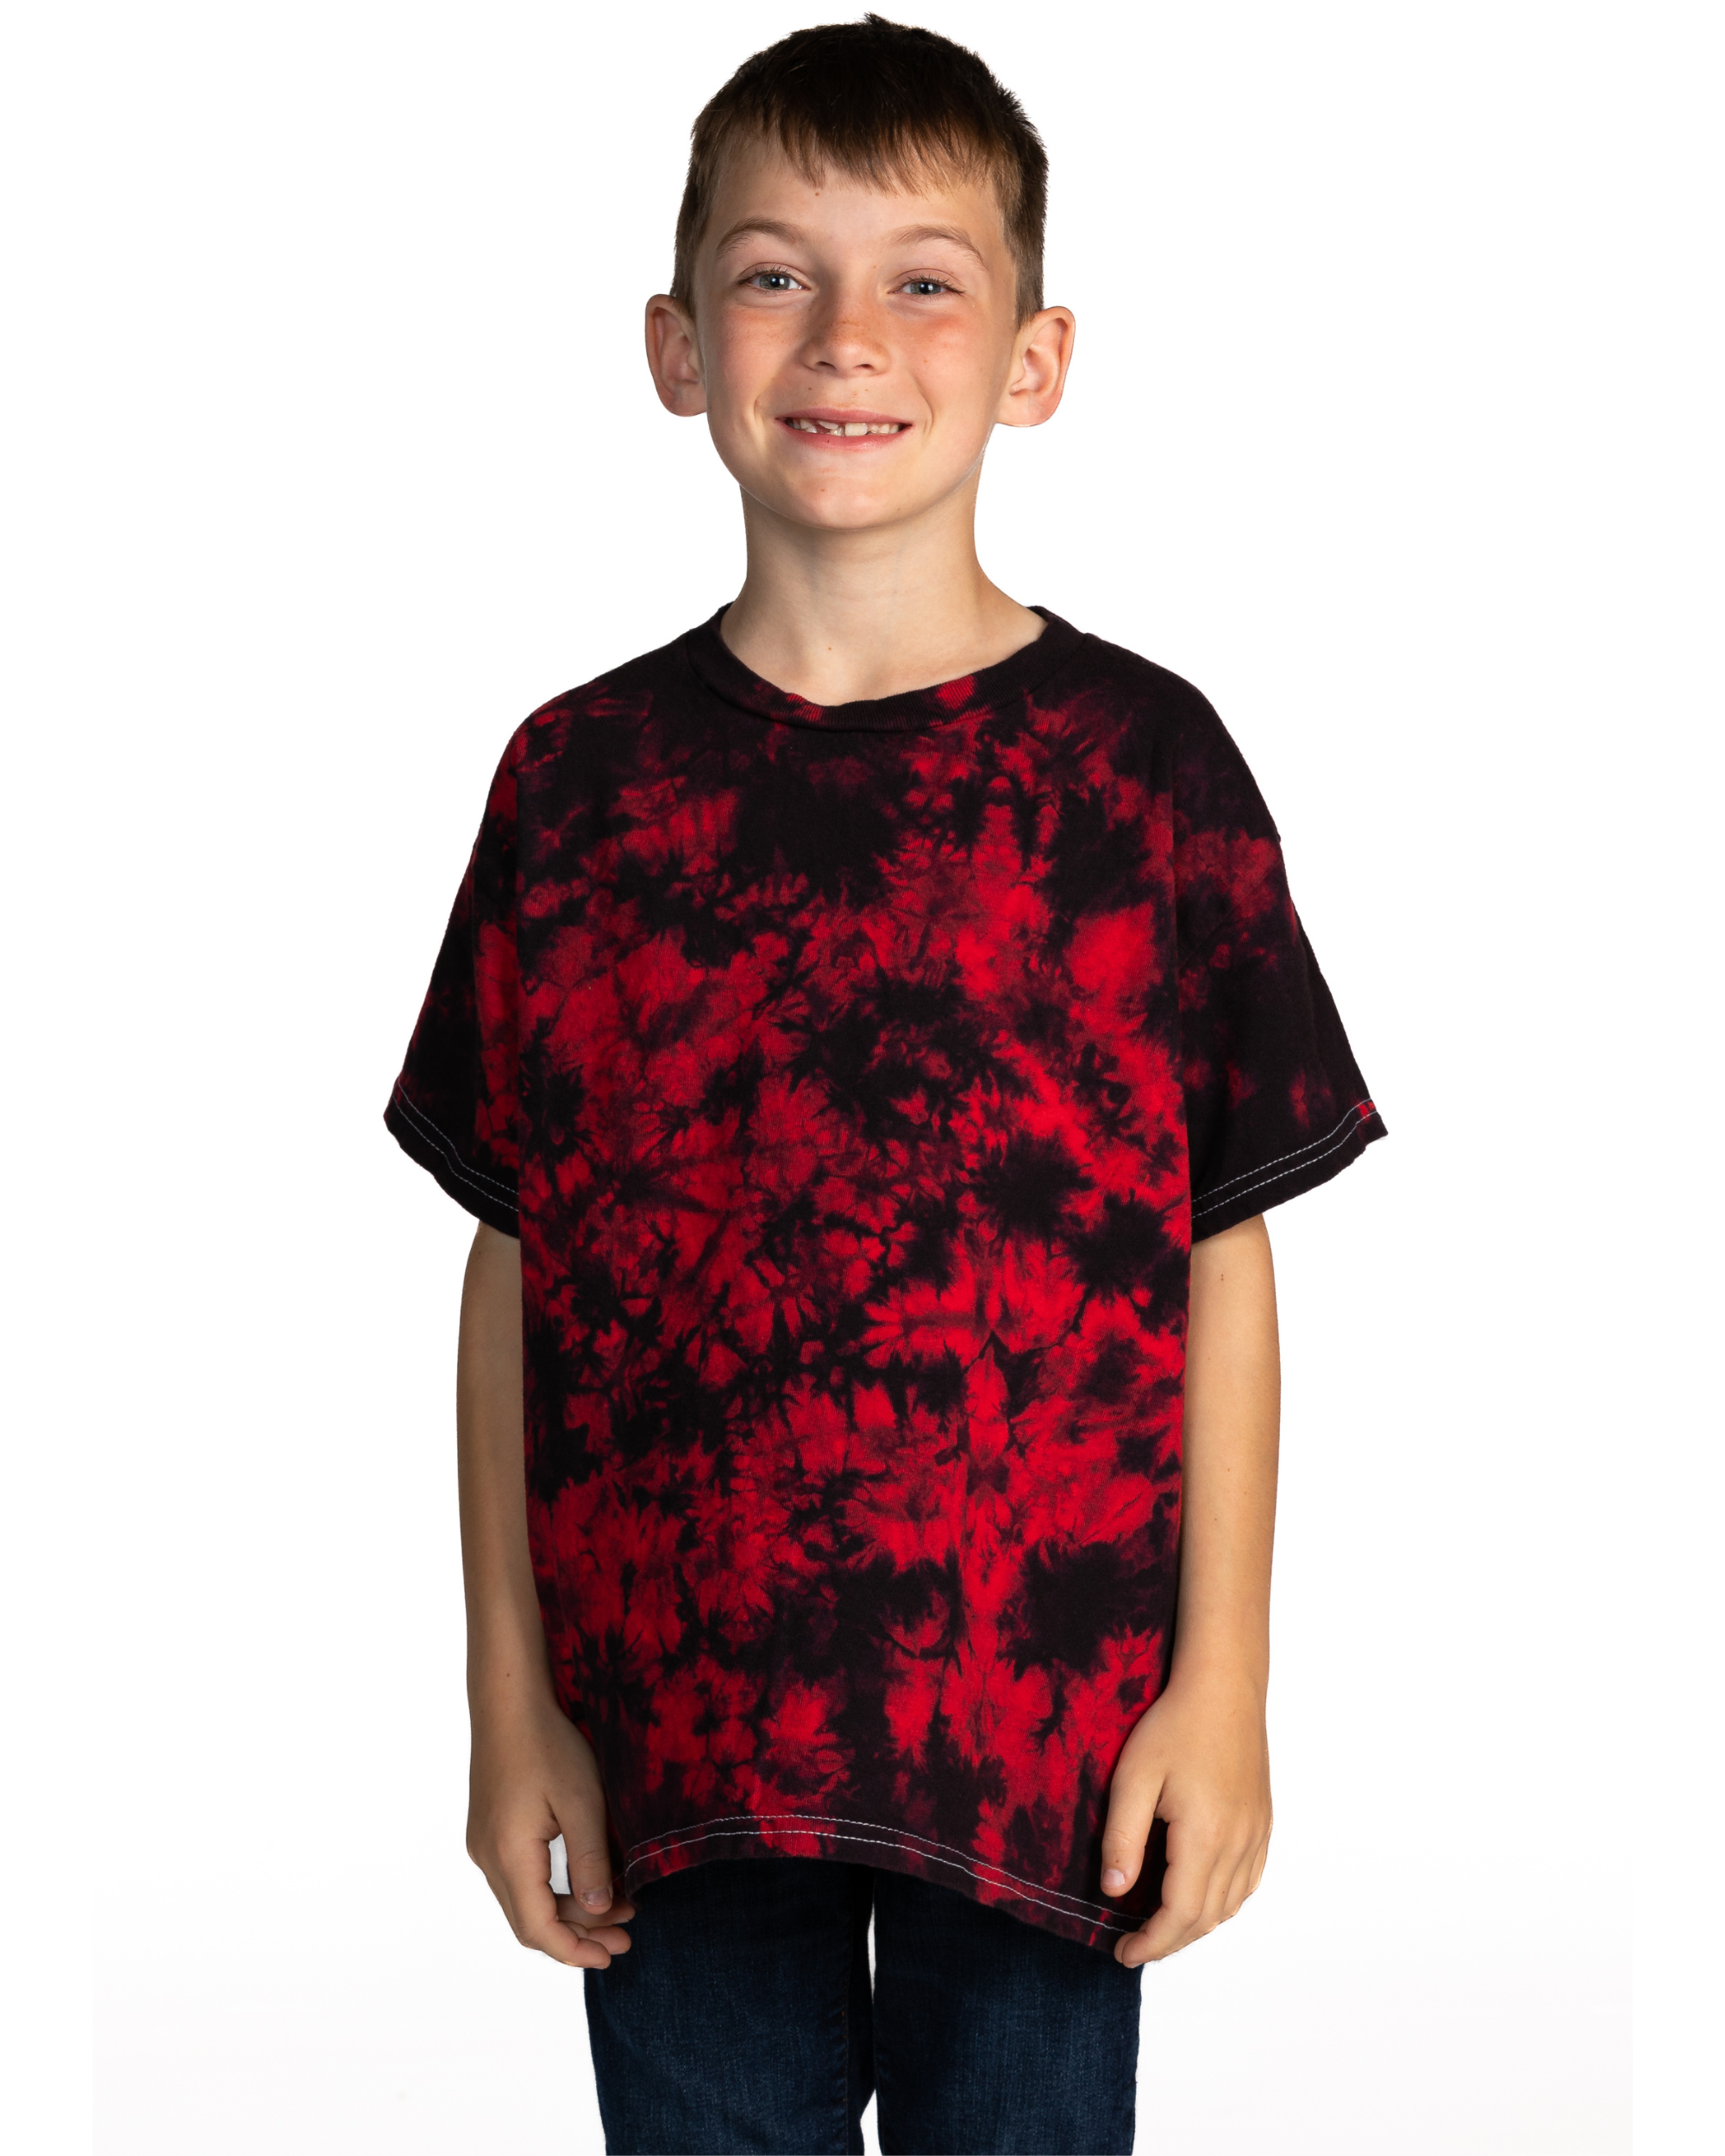 Mineral Wash Tees - Youth